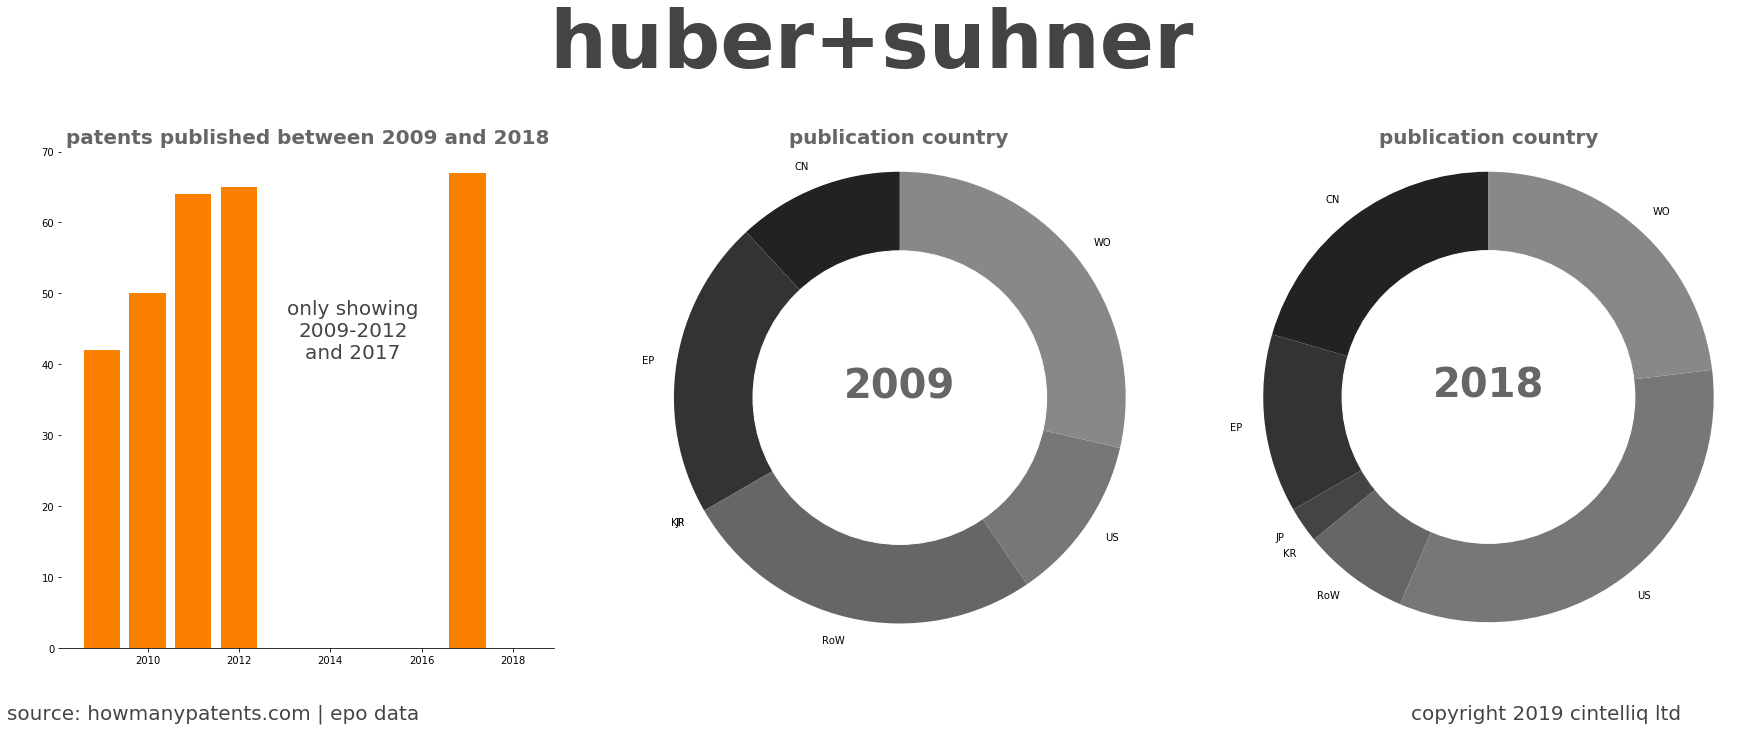 summary of patents for Huber+Suhner